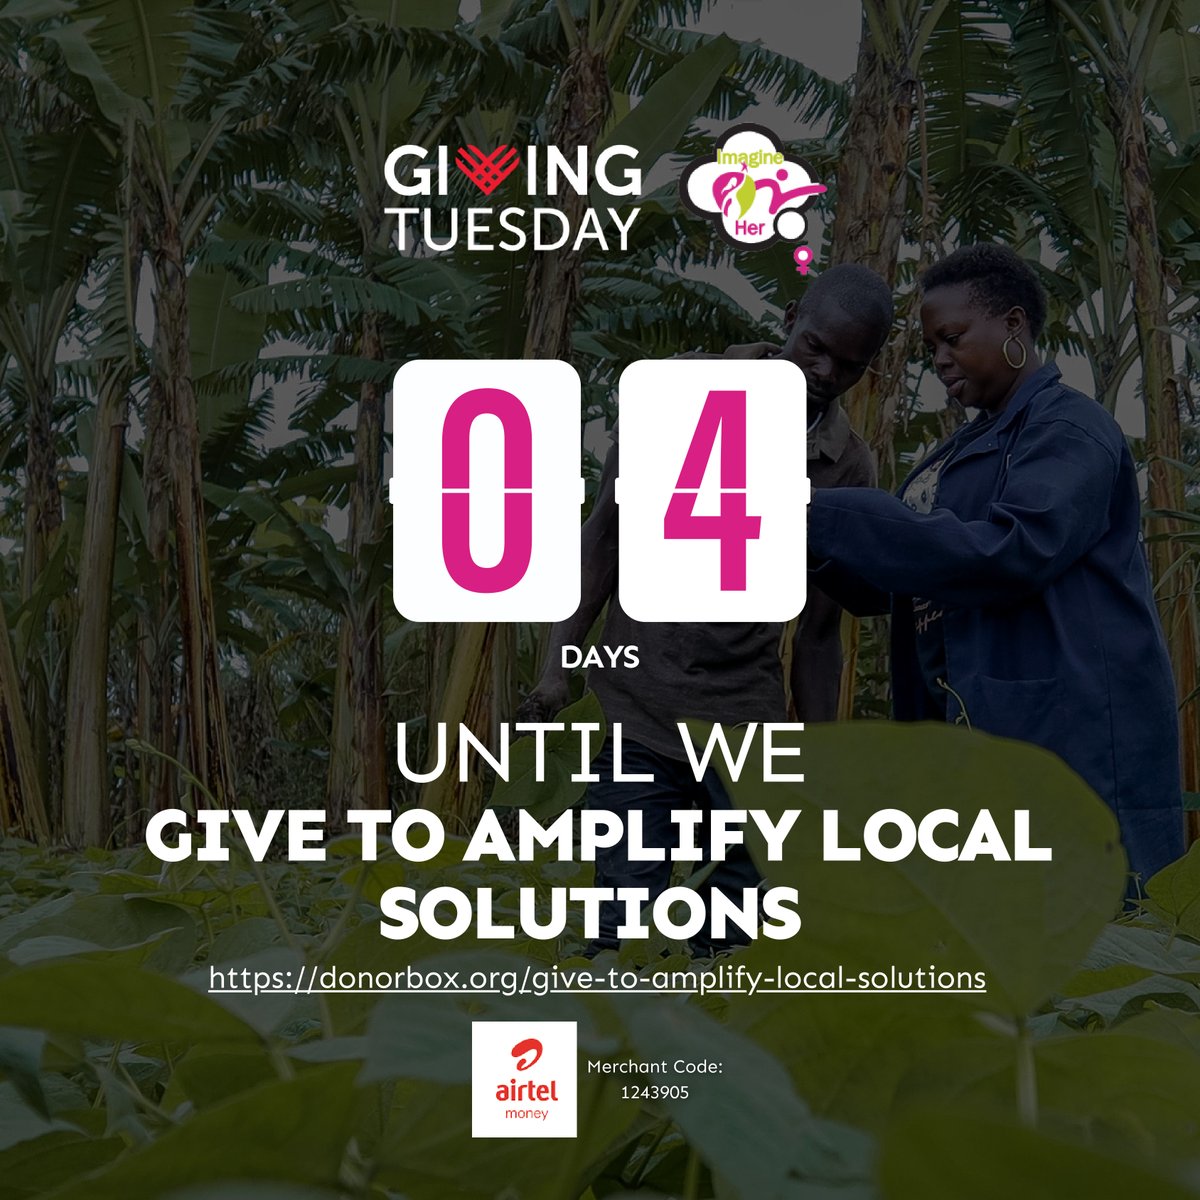 📢Save The Date! Nov 28 is #GivingTuesday. Support Our Community Coaches and be a part of investing in solutions to solve global challenges of climate change, food insecurity & poor housing Donate here: donorbox.org/give-to-amplif… #ImagineHer #GetReadyToGive #SupportOurWork